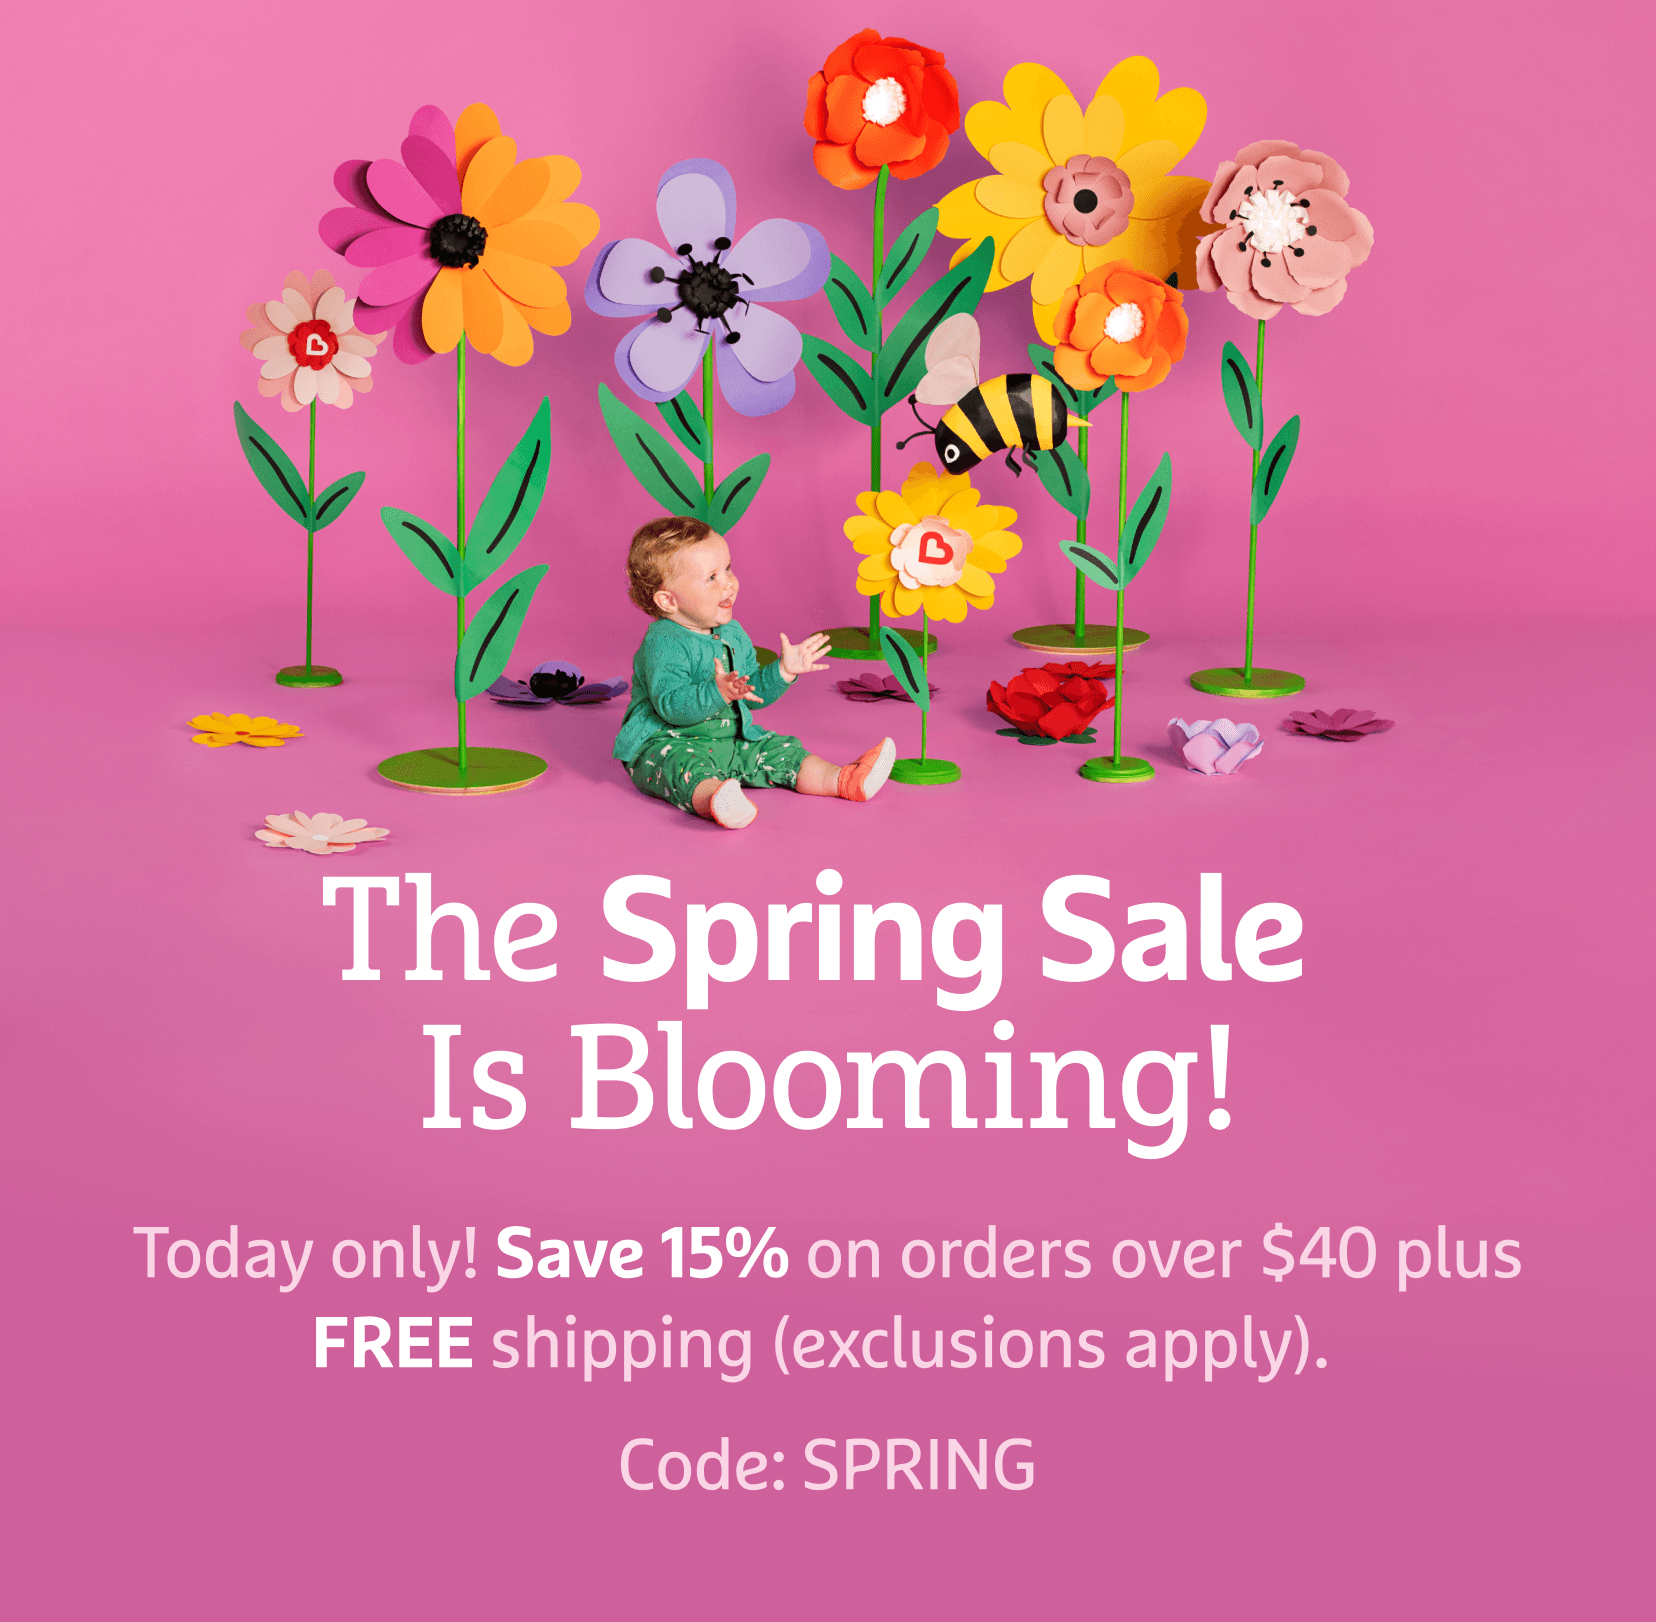 The Spring Sale is Blooming